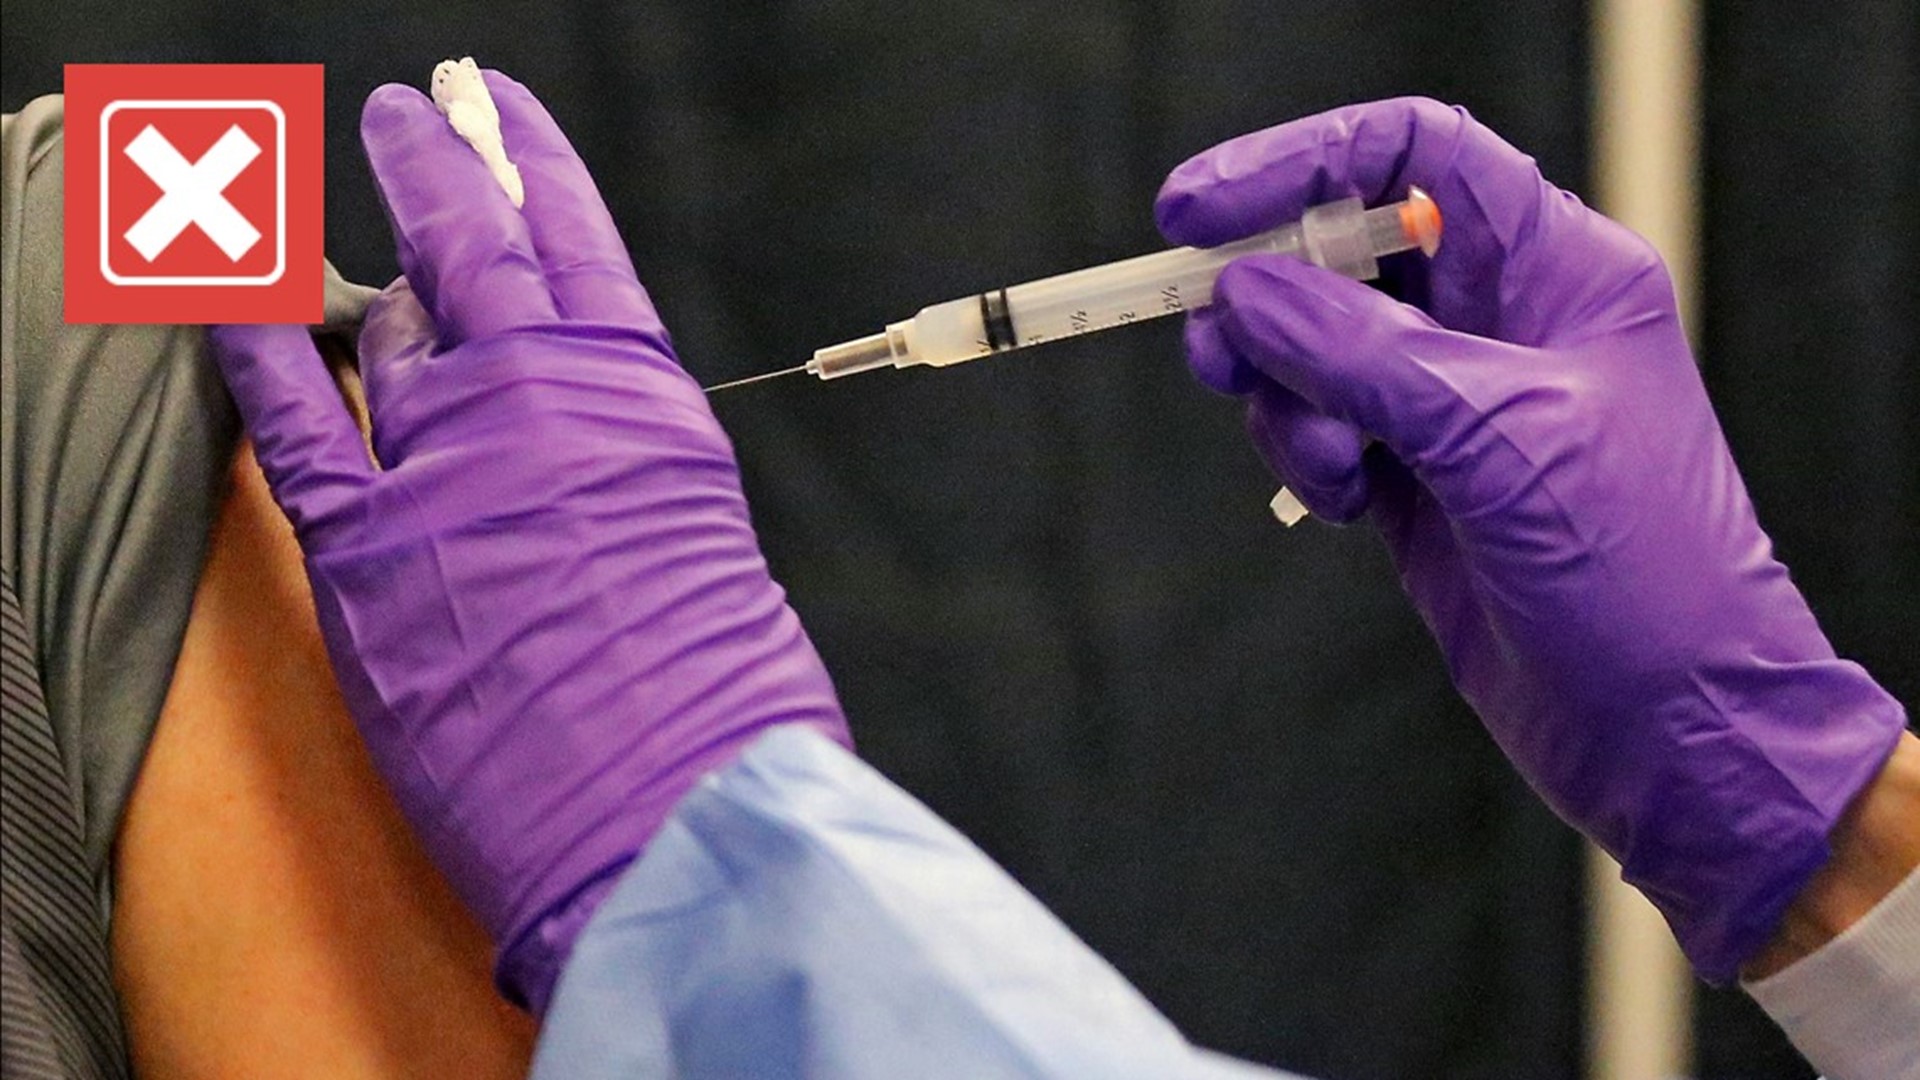 U.S. health officials are planning to offer a vaccine booster shot to fully vaccinated adults beginning the week of Sept. 20, or eight months after the second dose.